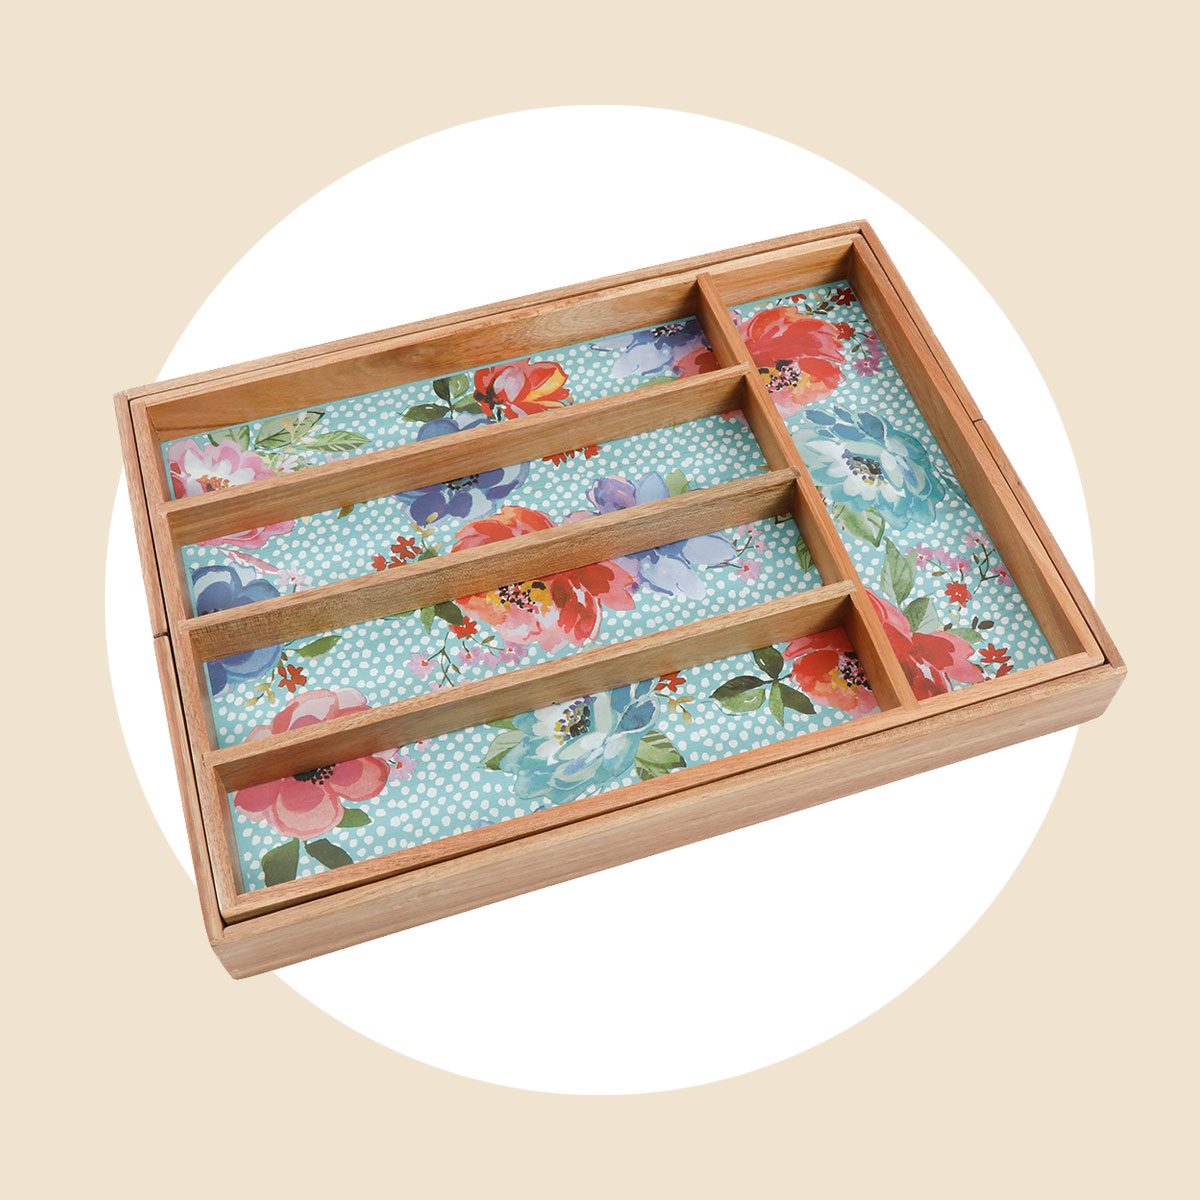 The Pioneer Woman Expandable Drawer Insert